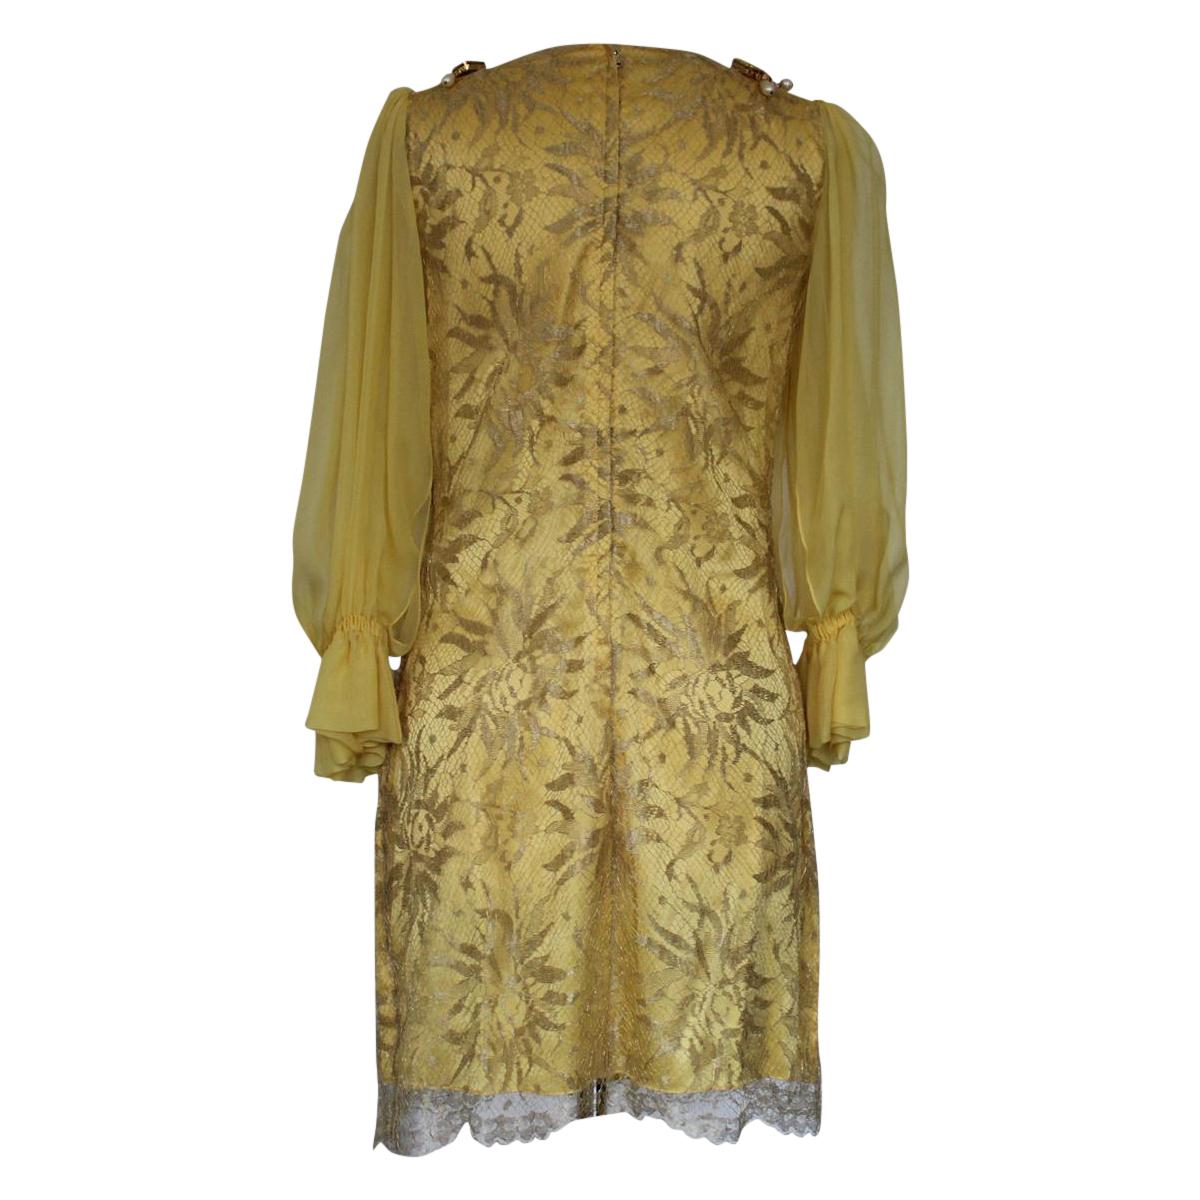 Super chic dress by Dolce & Gabbana
Lurex (62%) Silk (30%) Nylon
Yellow color
Silk sleeves
Faux pearls and crystals embellishment
Total length cm 86 (33.8 inches)
Shoulders cm 32 (12.5 inches)
Worldwide express shipping included in the price !